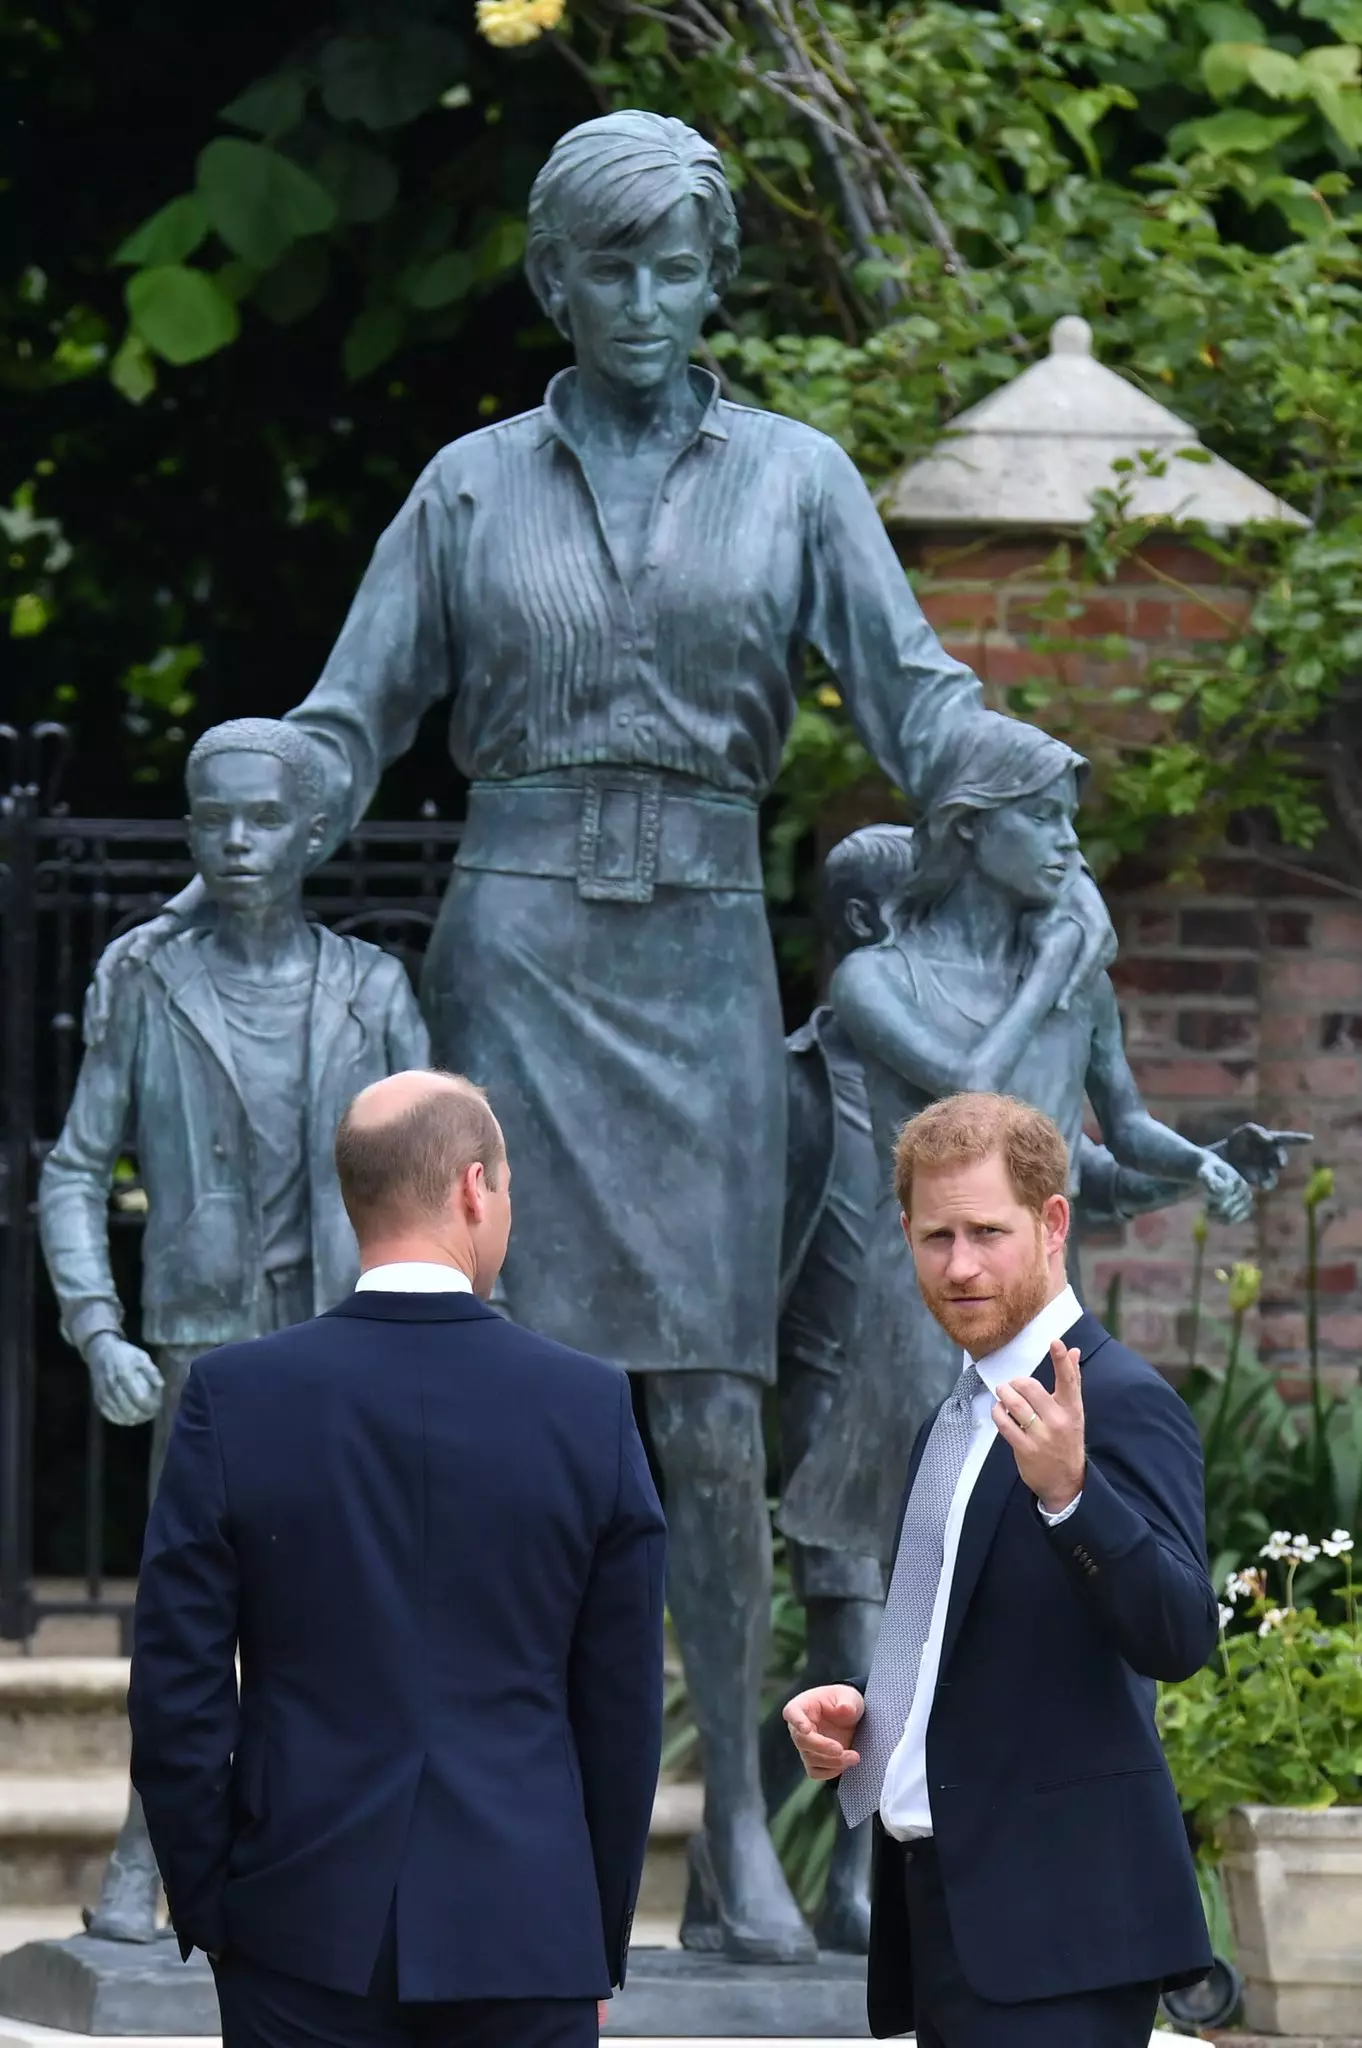 The statue pictures Princess Diana with three children (